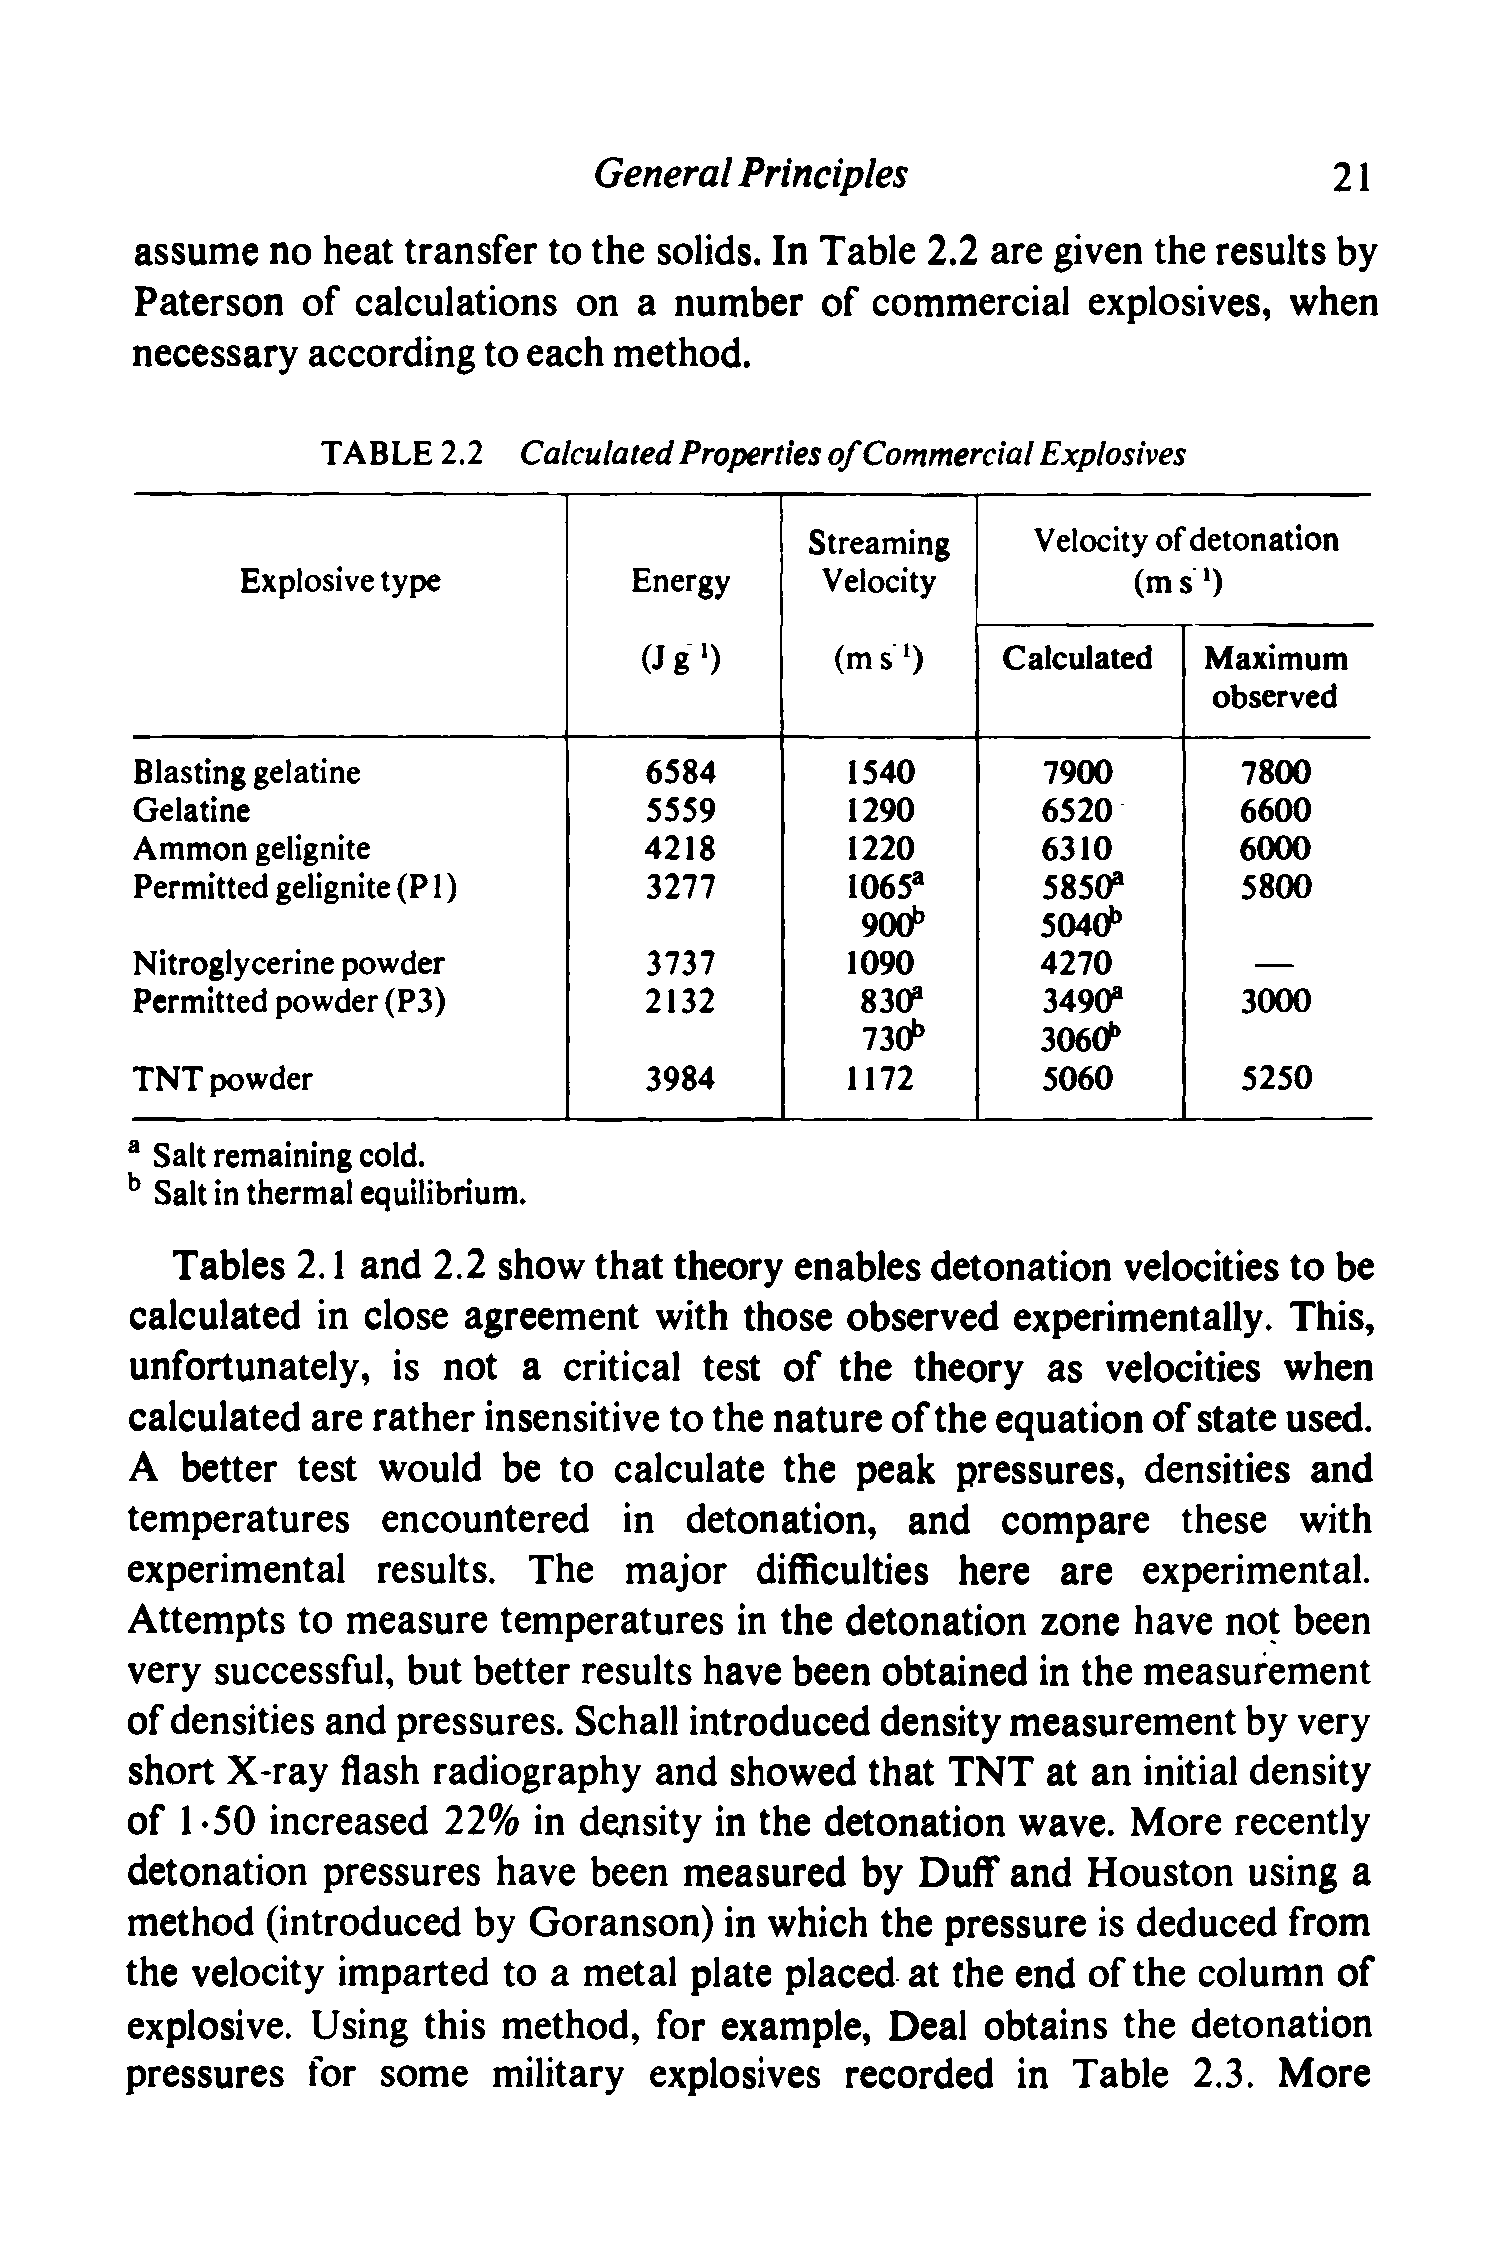 Tables 2.1 and 2.2 show that theory enables detonation velocities to be calculated in close agreement with those observed experimentally. This, unfortunately, is not a critical test of the theory as velocities when calculated are rather insensitive to the nature of the equation of state used. A better test would be to calculate the peak pressures, densities and temperatures encountered in detonation, and compare these with experimental results. The major difficulties here are experimental. Attempts to measure temperatures in the detonation zone have not been very successful, but better results have been obtained in the measurement of densities and pressures. Schall introduced density measurement by very short X-ray flash radiography and showed that TNT at an initial density of 1 -50 increased 22% in density in the detonation wave. More recently detonation pressures have been measured by Duff and Houston using a method (introduced by Goranson) in which the pressure is deduced from the velocity imparted to a metal plate placed at the end of the column of explosive. Using this method, for example, Deal obtains the detonation pressures for some military explosives recorded in Table 2.3. More...